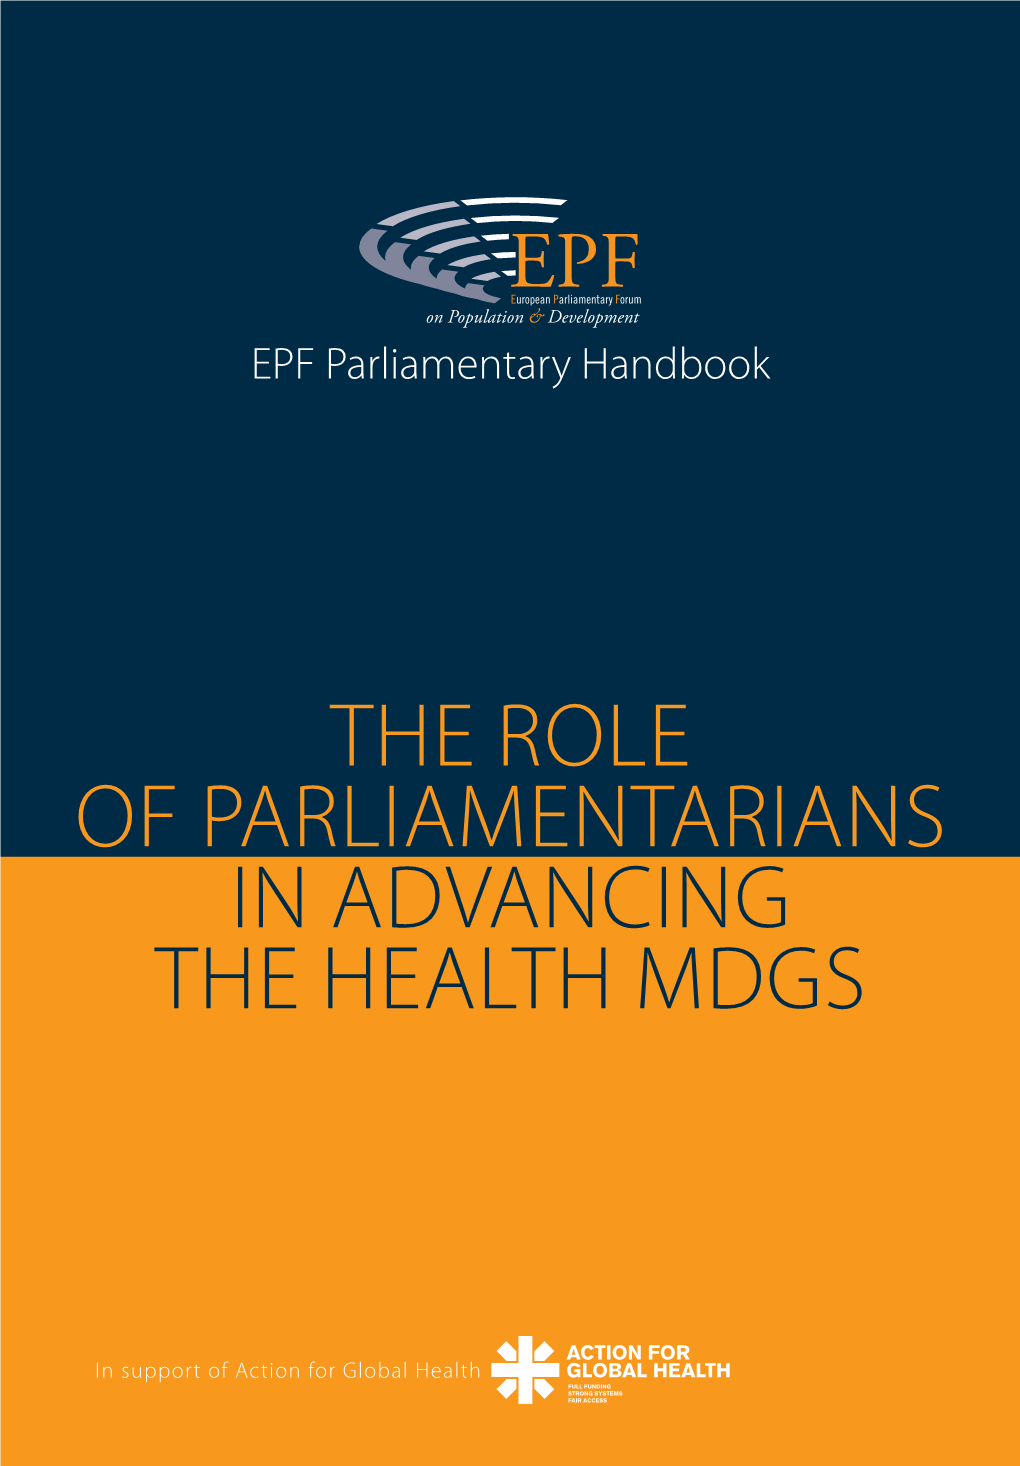 The Role of Parliamentarians in Advancing the Health Mdgs